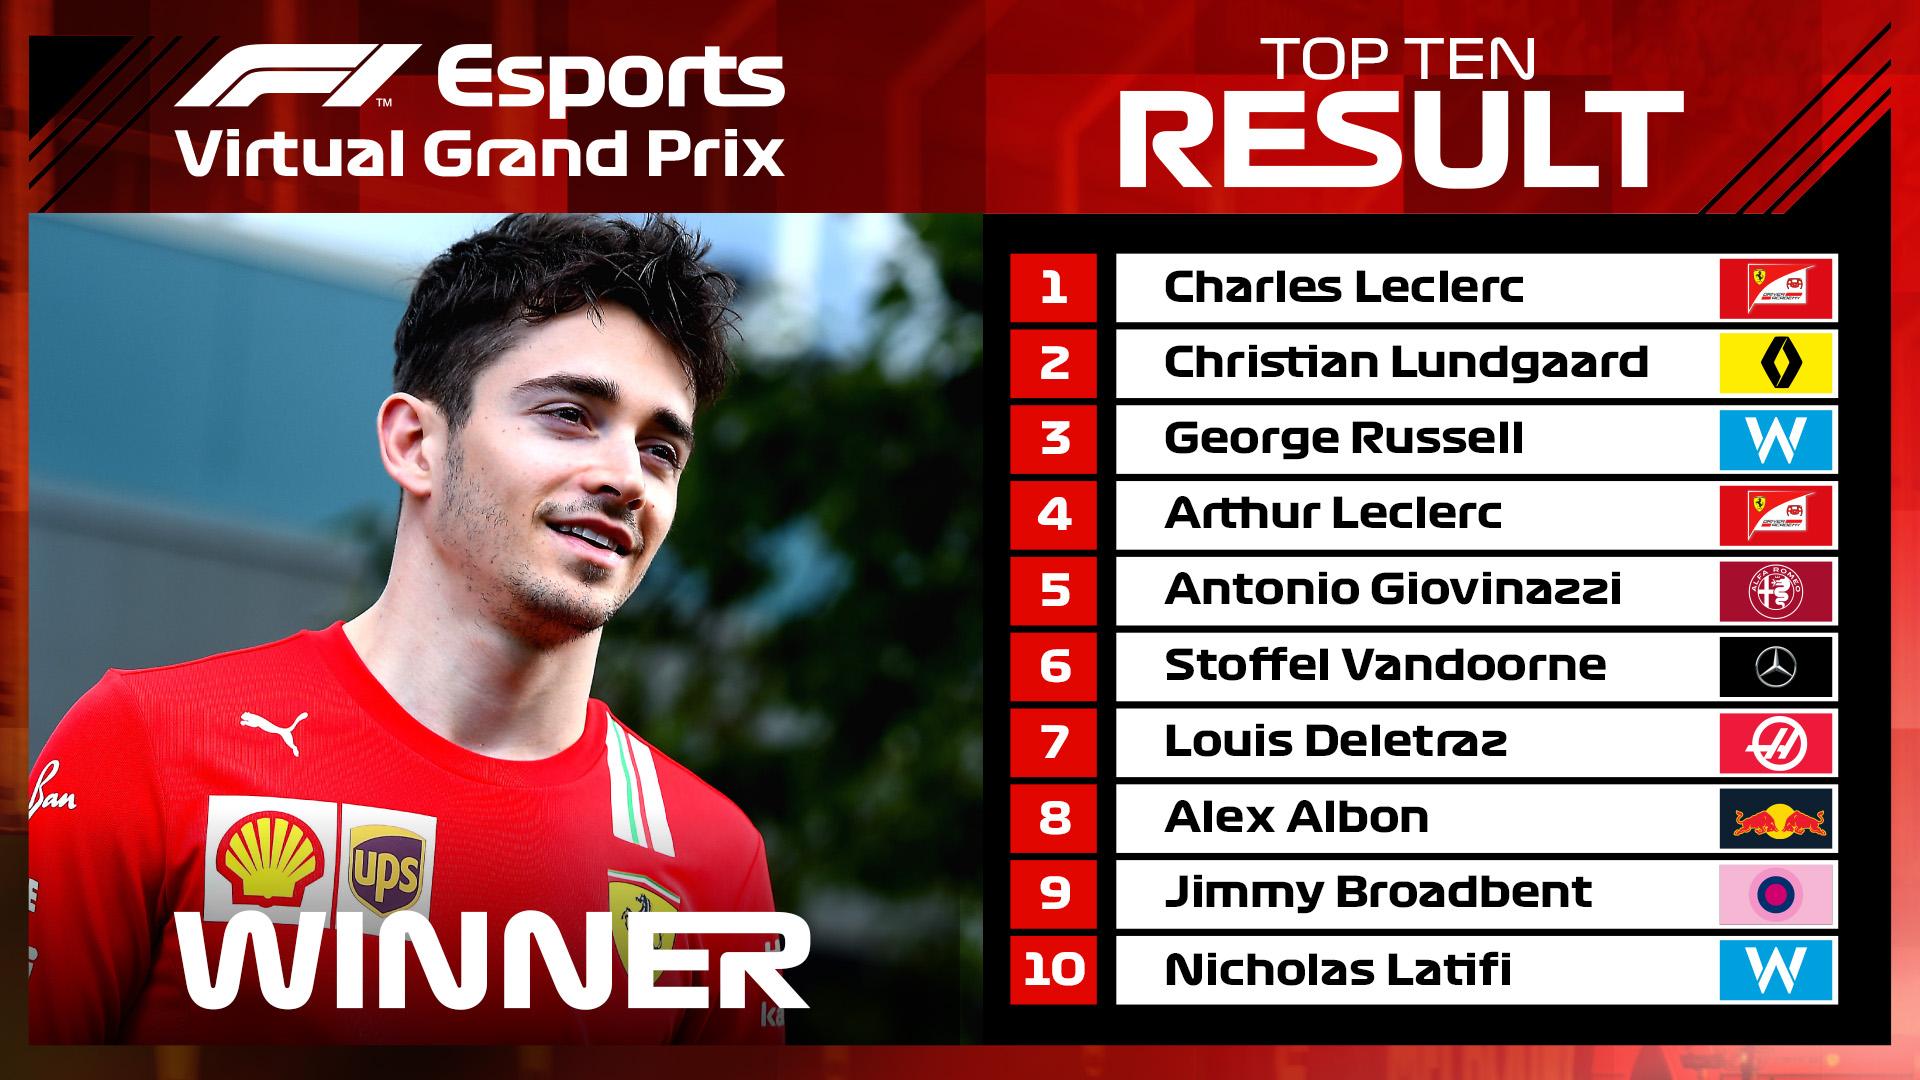 Charles Leclerc made it one from one in his F1 Virtual Grand Prix debut.